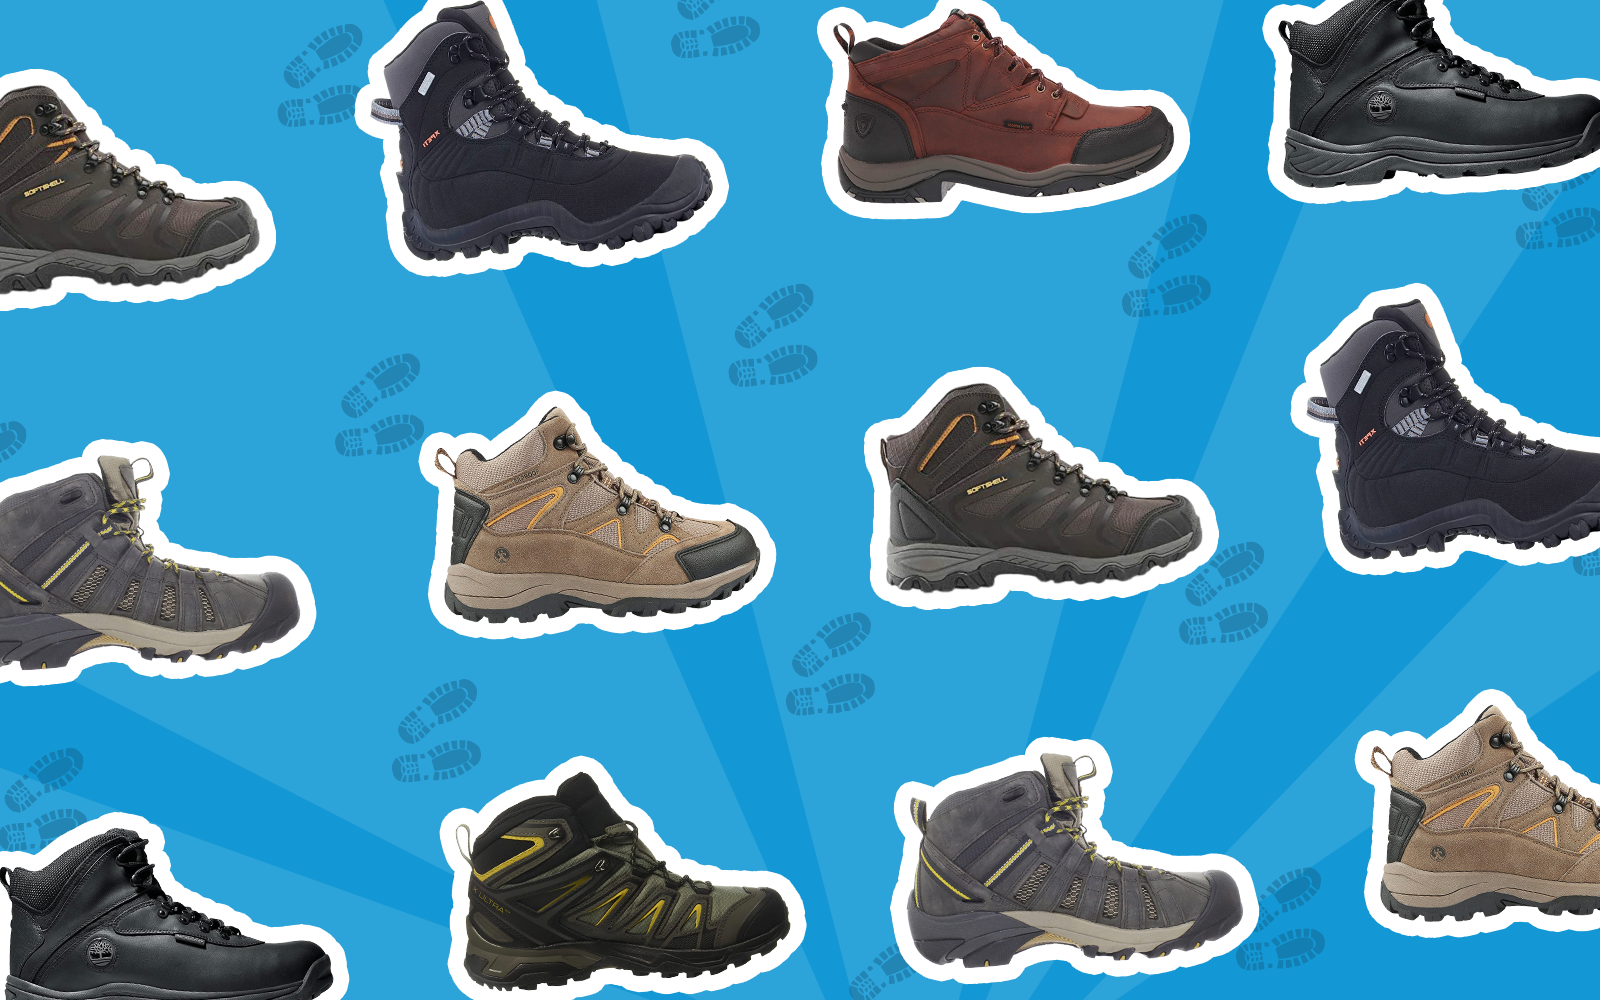 The 7 Best Hiking Boots to Buy in 2023